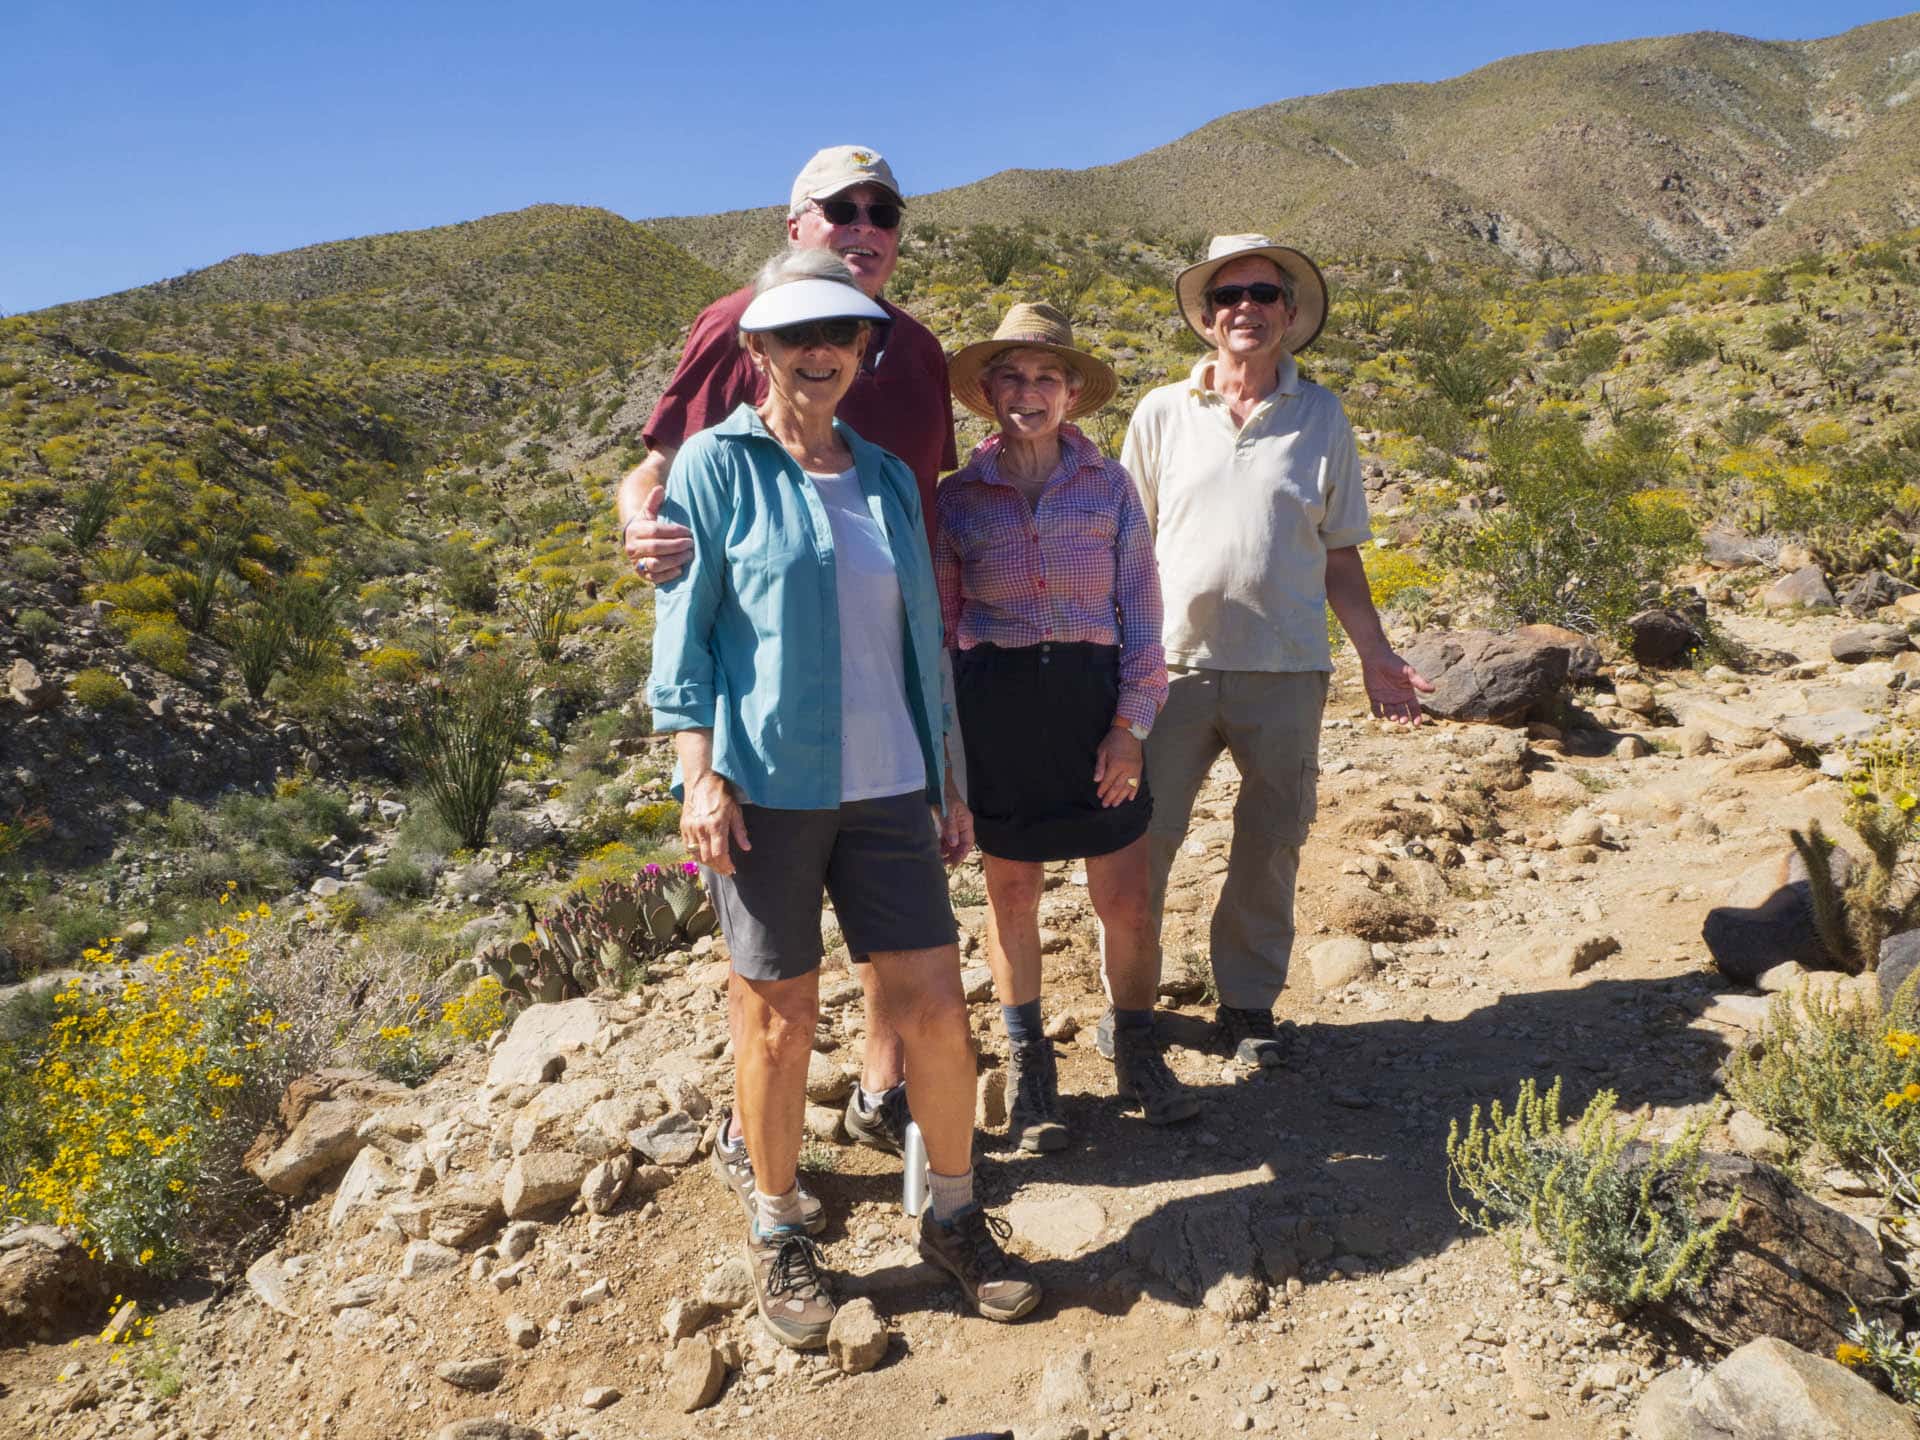 Hiking the Cats Loop Nature Trail with friends in the Anza-Borrego Desert State Park